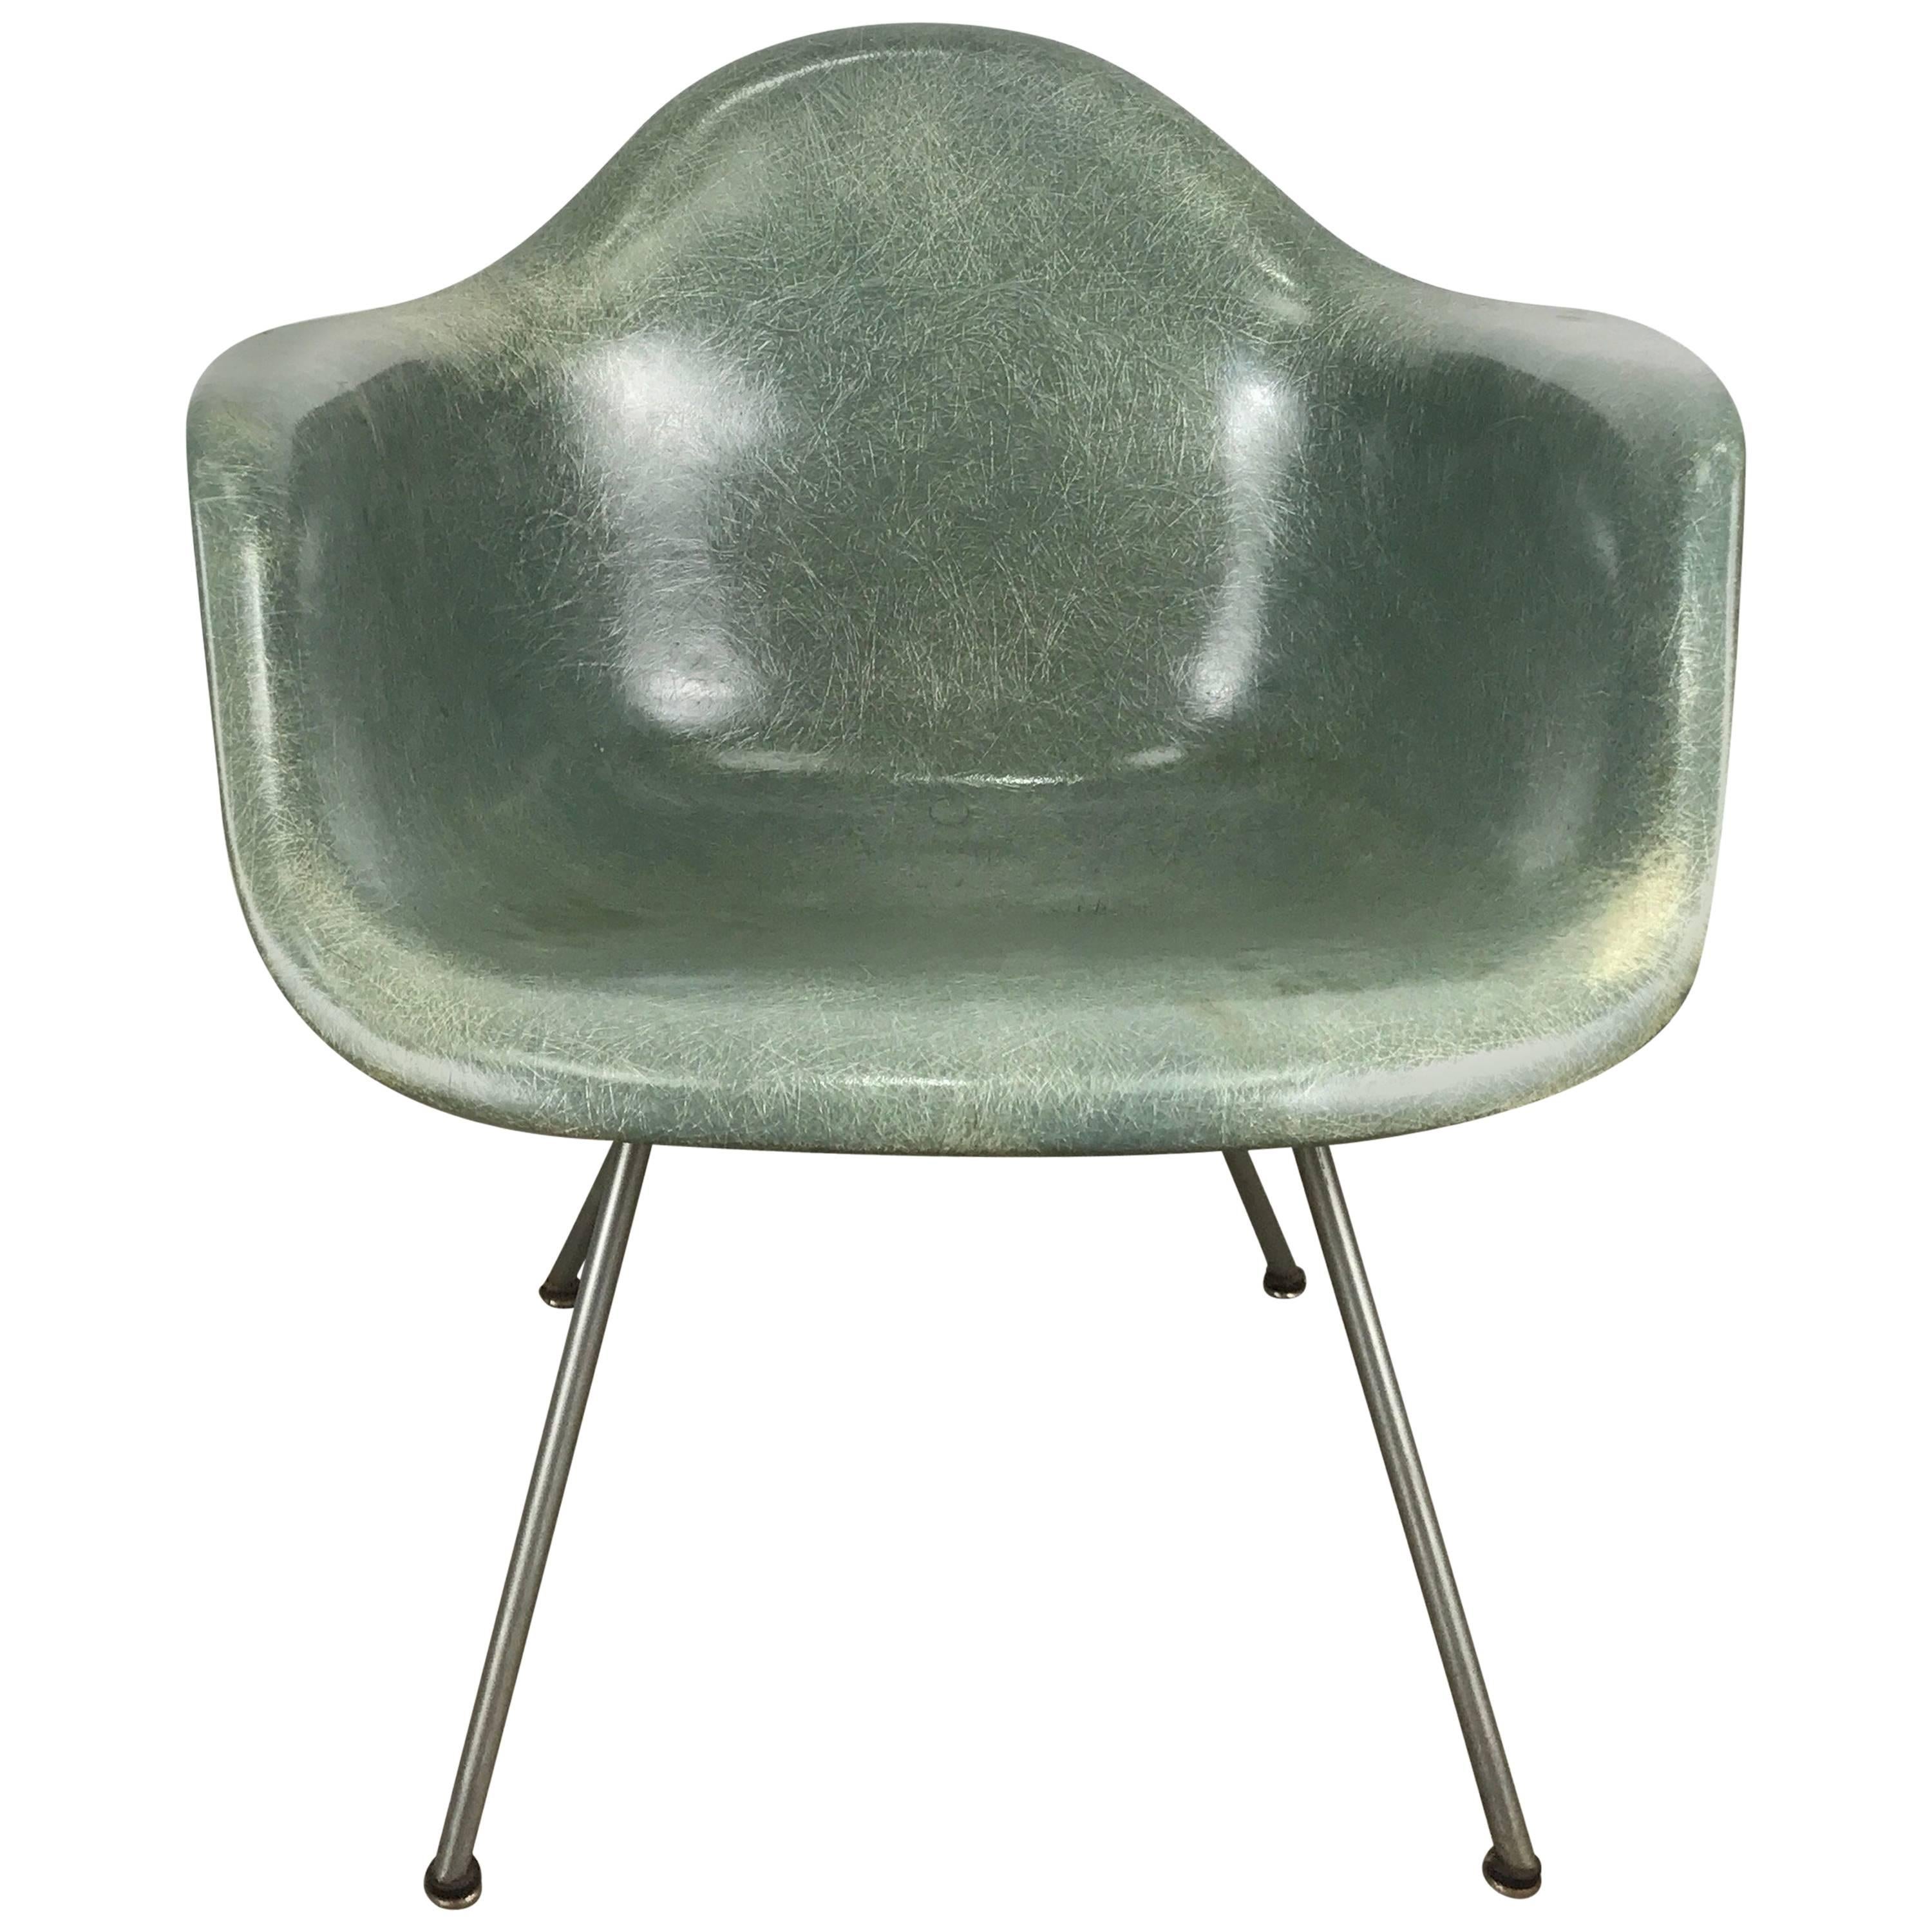 Classic Modernist Charles and Ray Eames Arm Shell Lounge Chair, Zenith For Sale